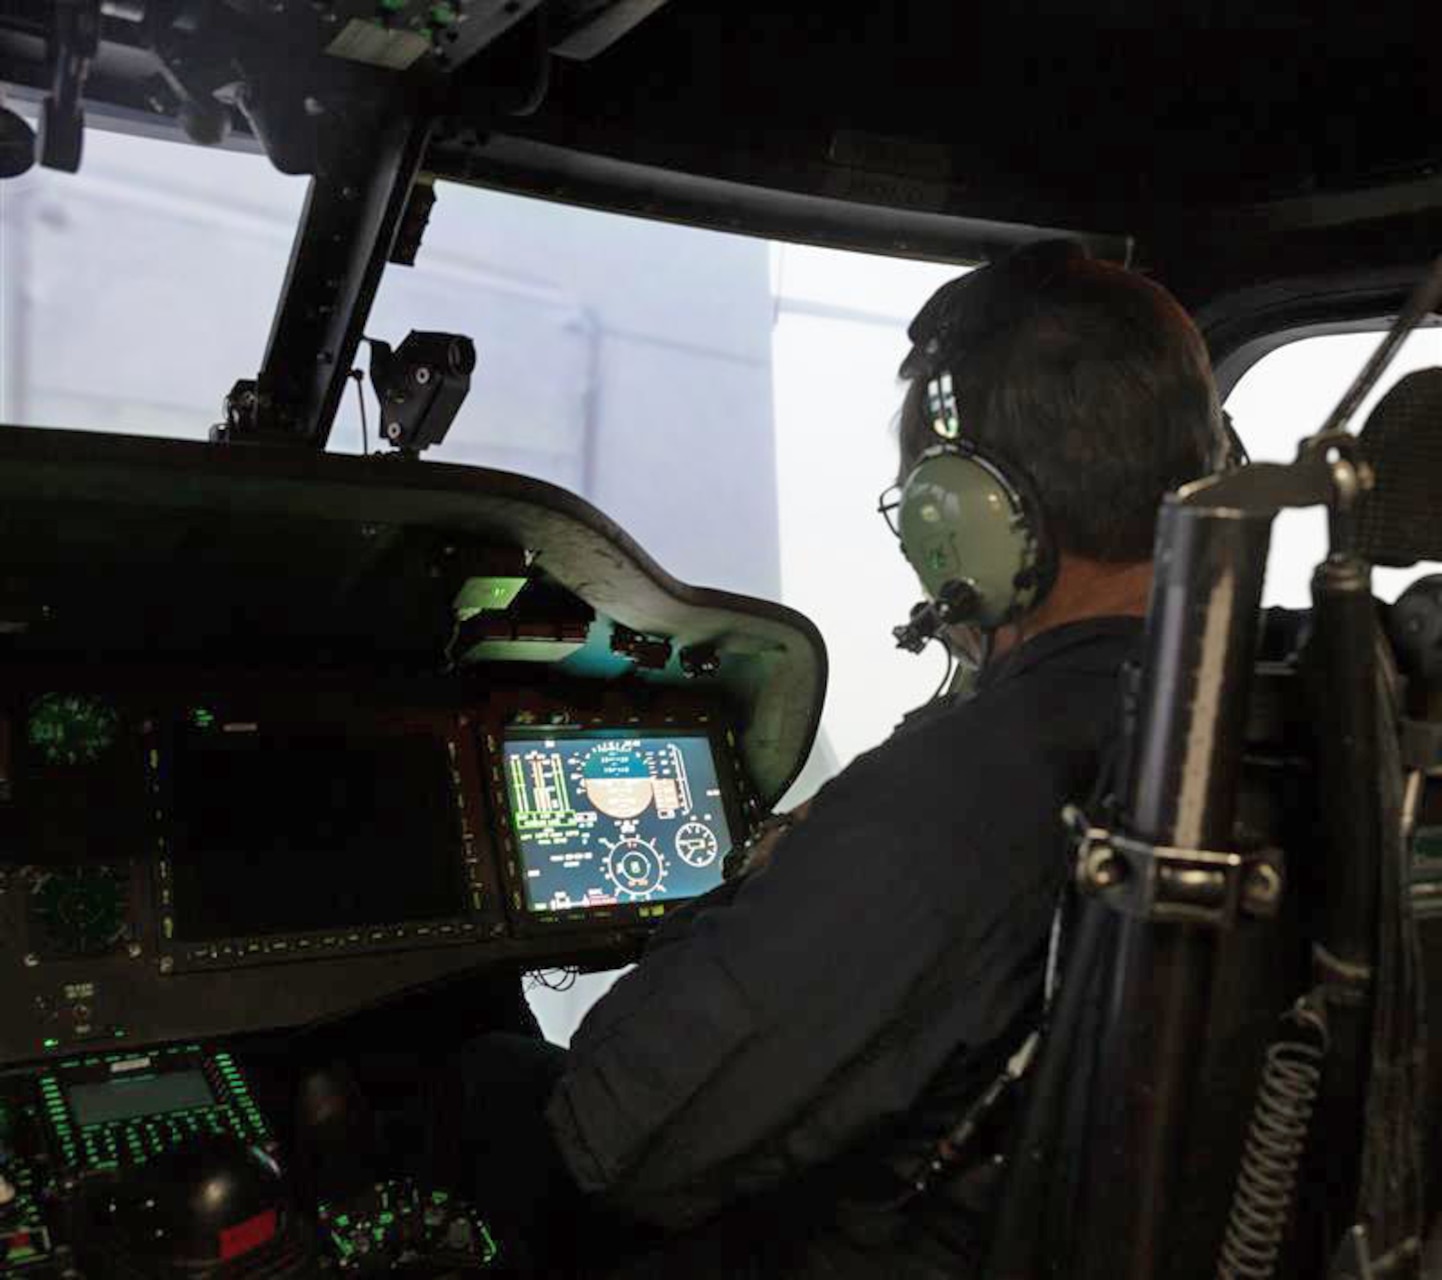 A rotary pilot performs a shipboard-landing maneuver through fog in a simulated scenario at the Naval Air Warfare Center Aircraft Division’s Manned Flight Simulator in 
Patuxent River, Md.